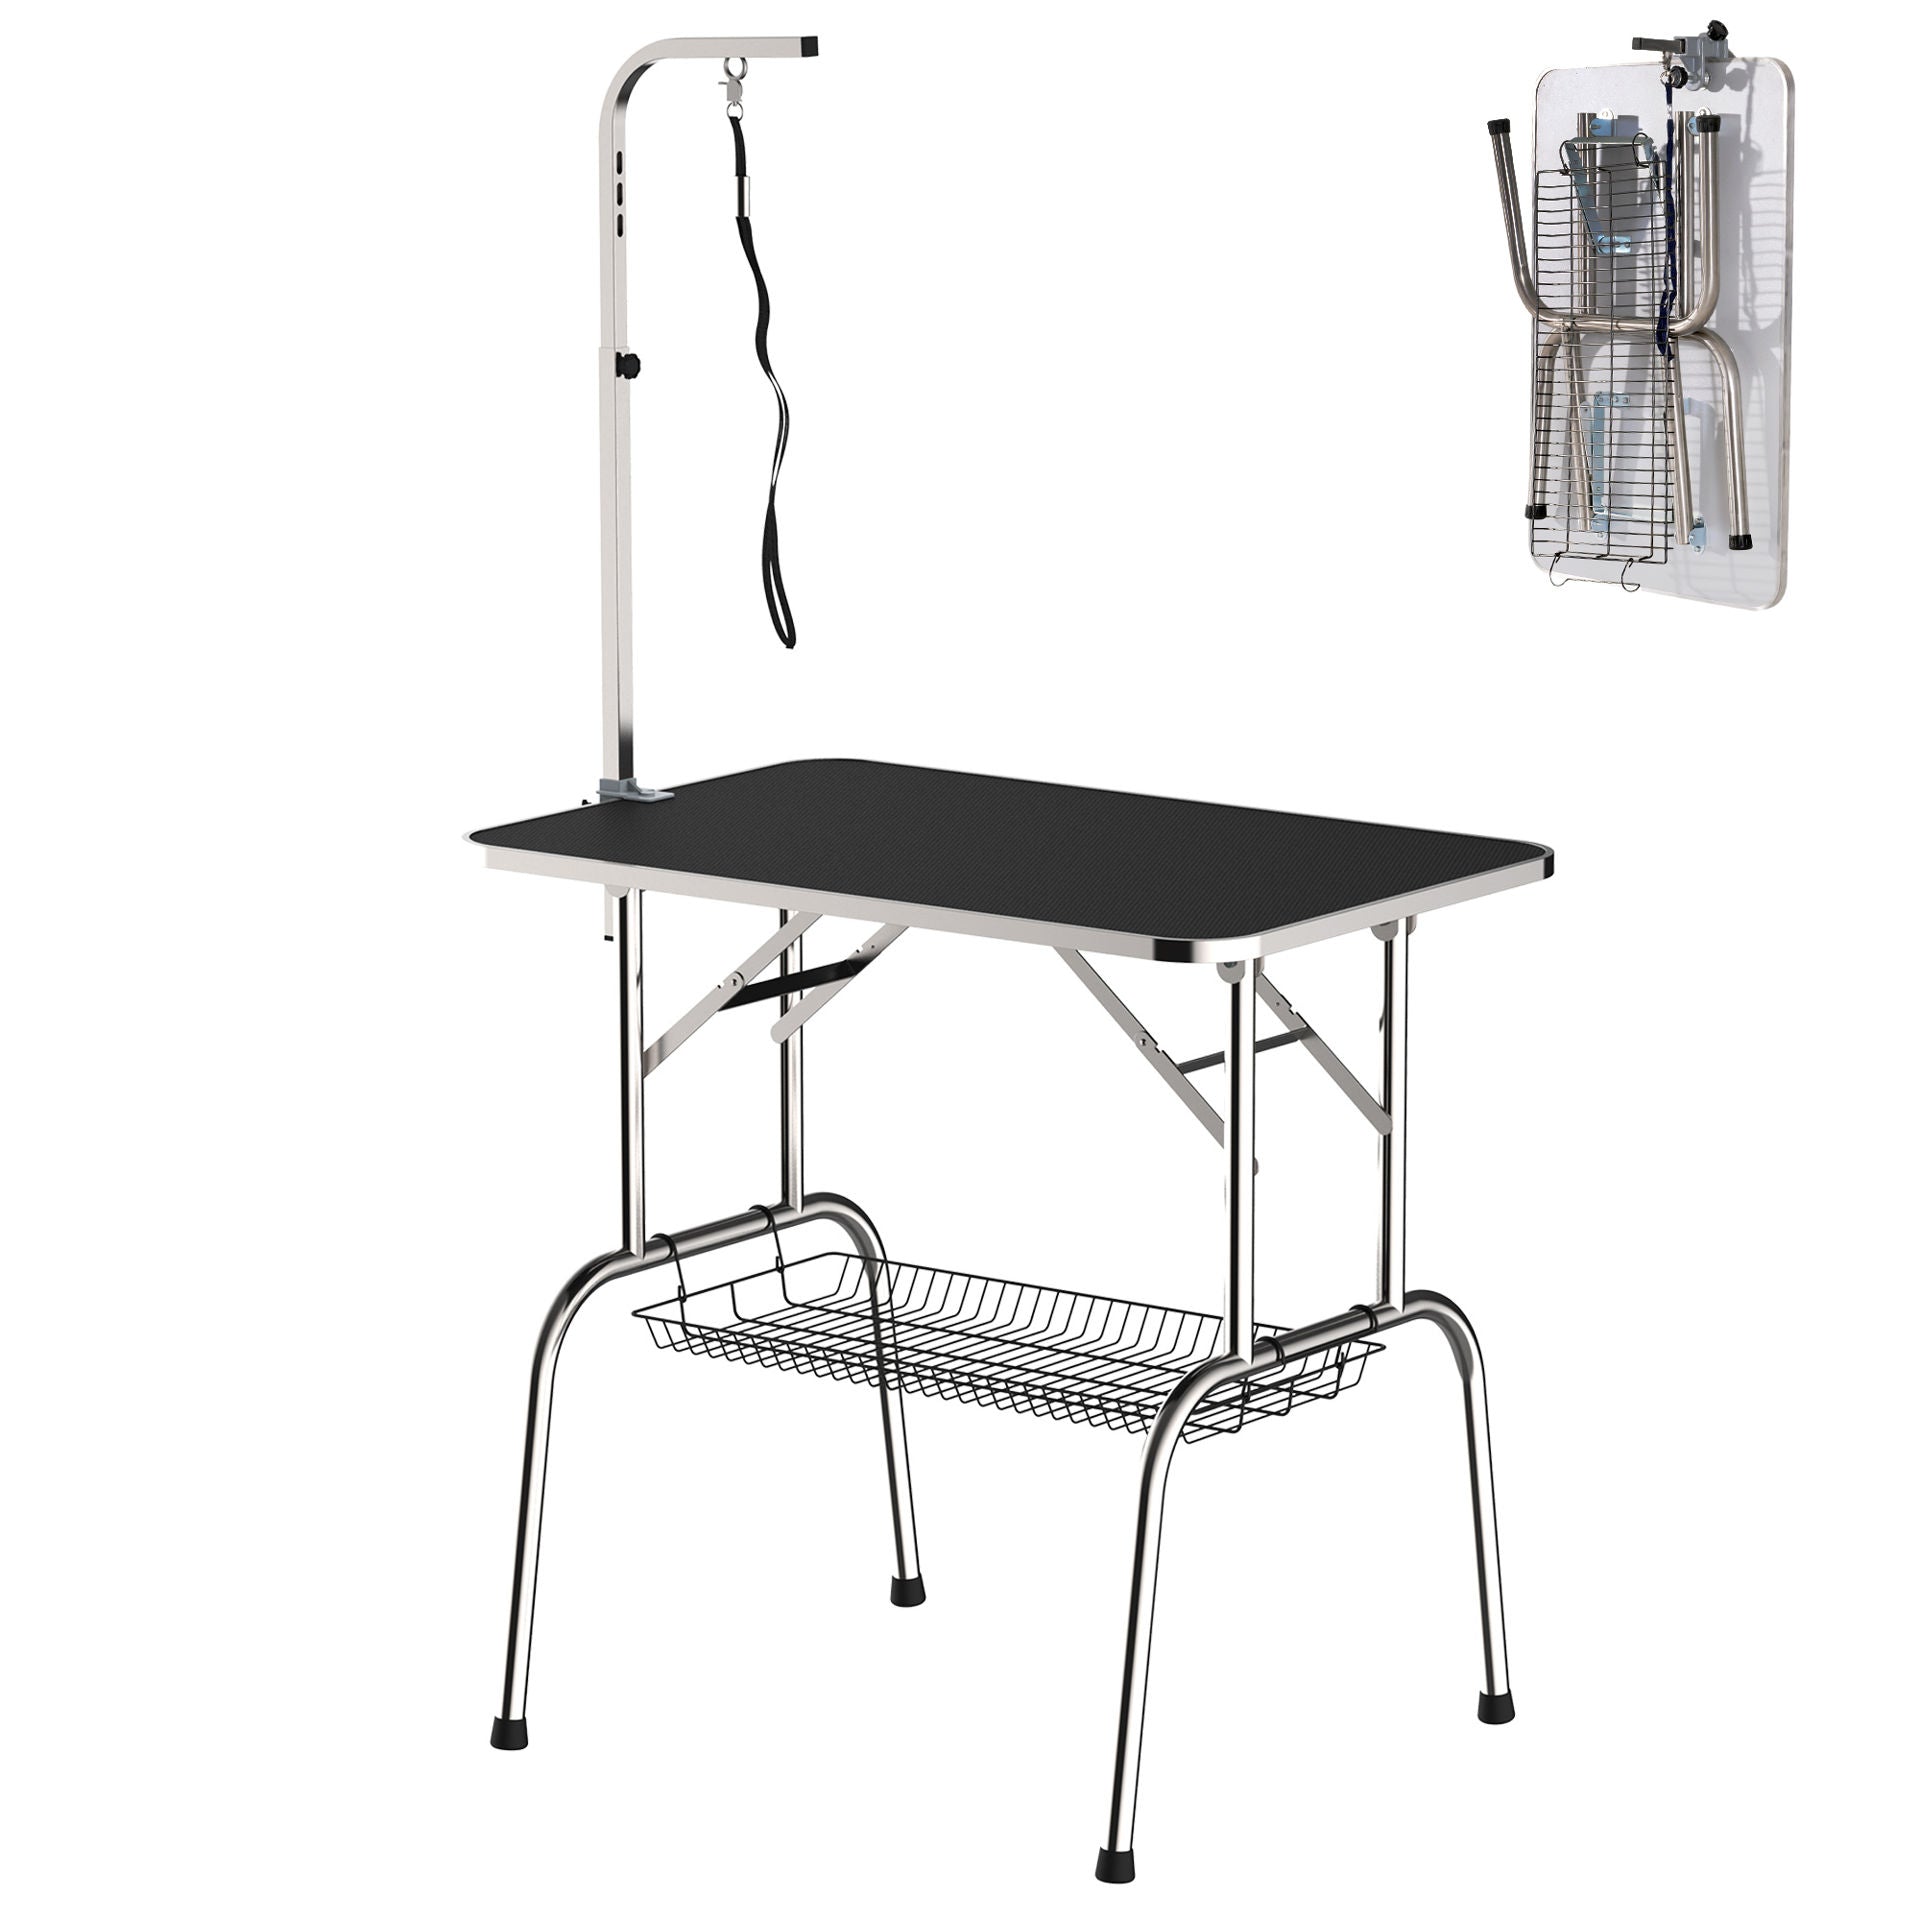 Nancy's The Hill Grooming table, Shaving table, Dog grooming table foldable height adjustable Stainless steel